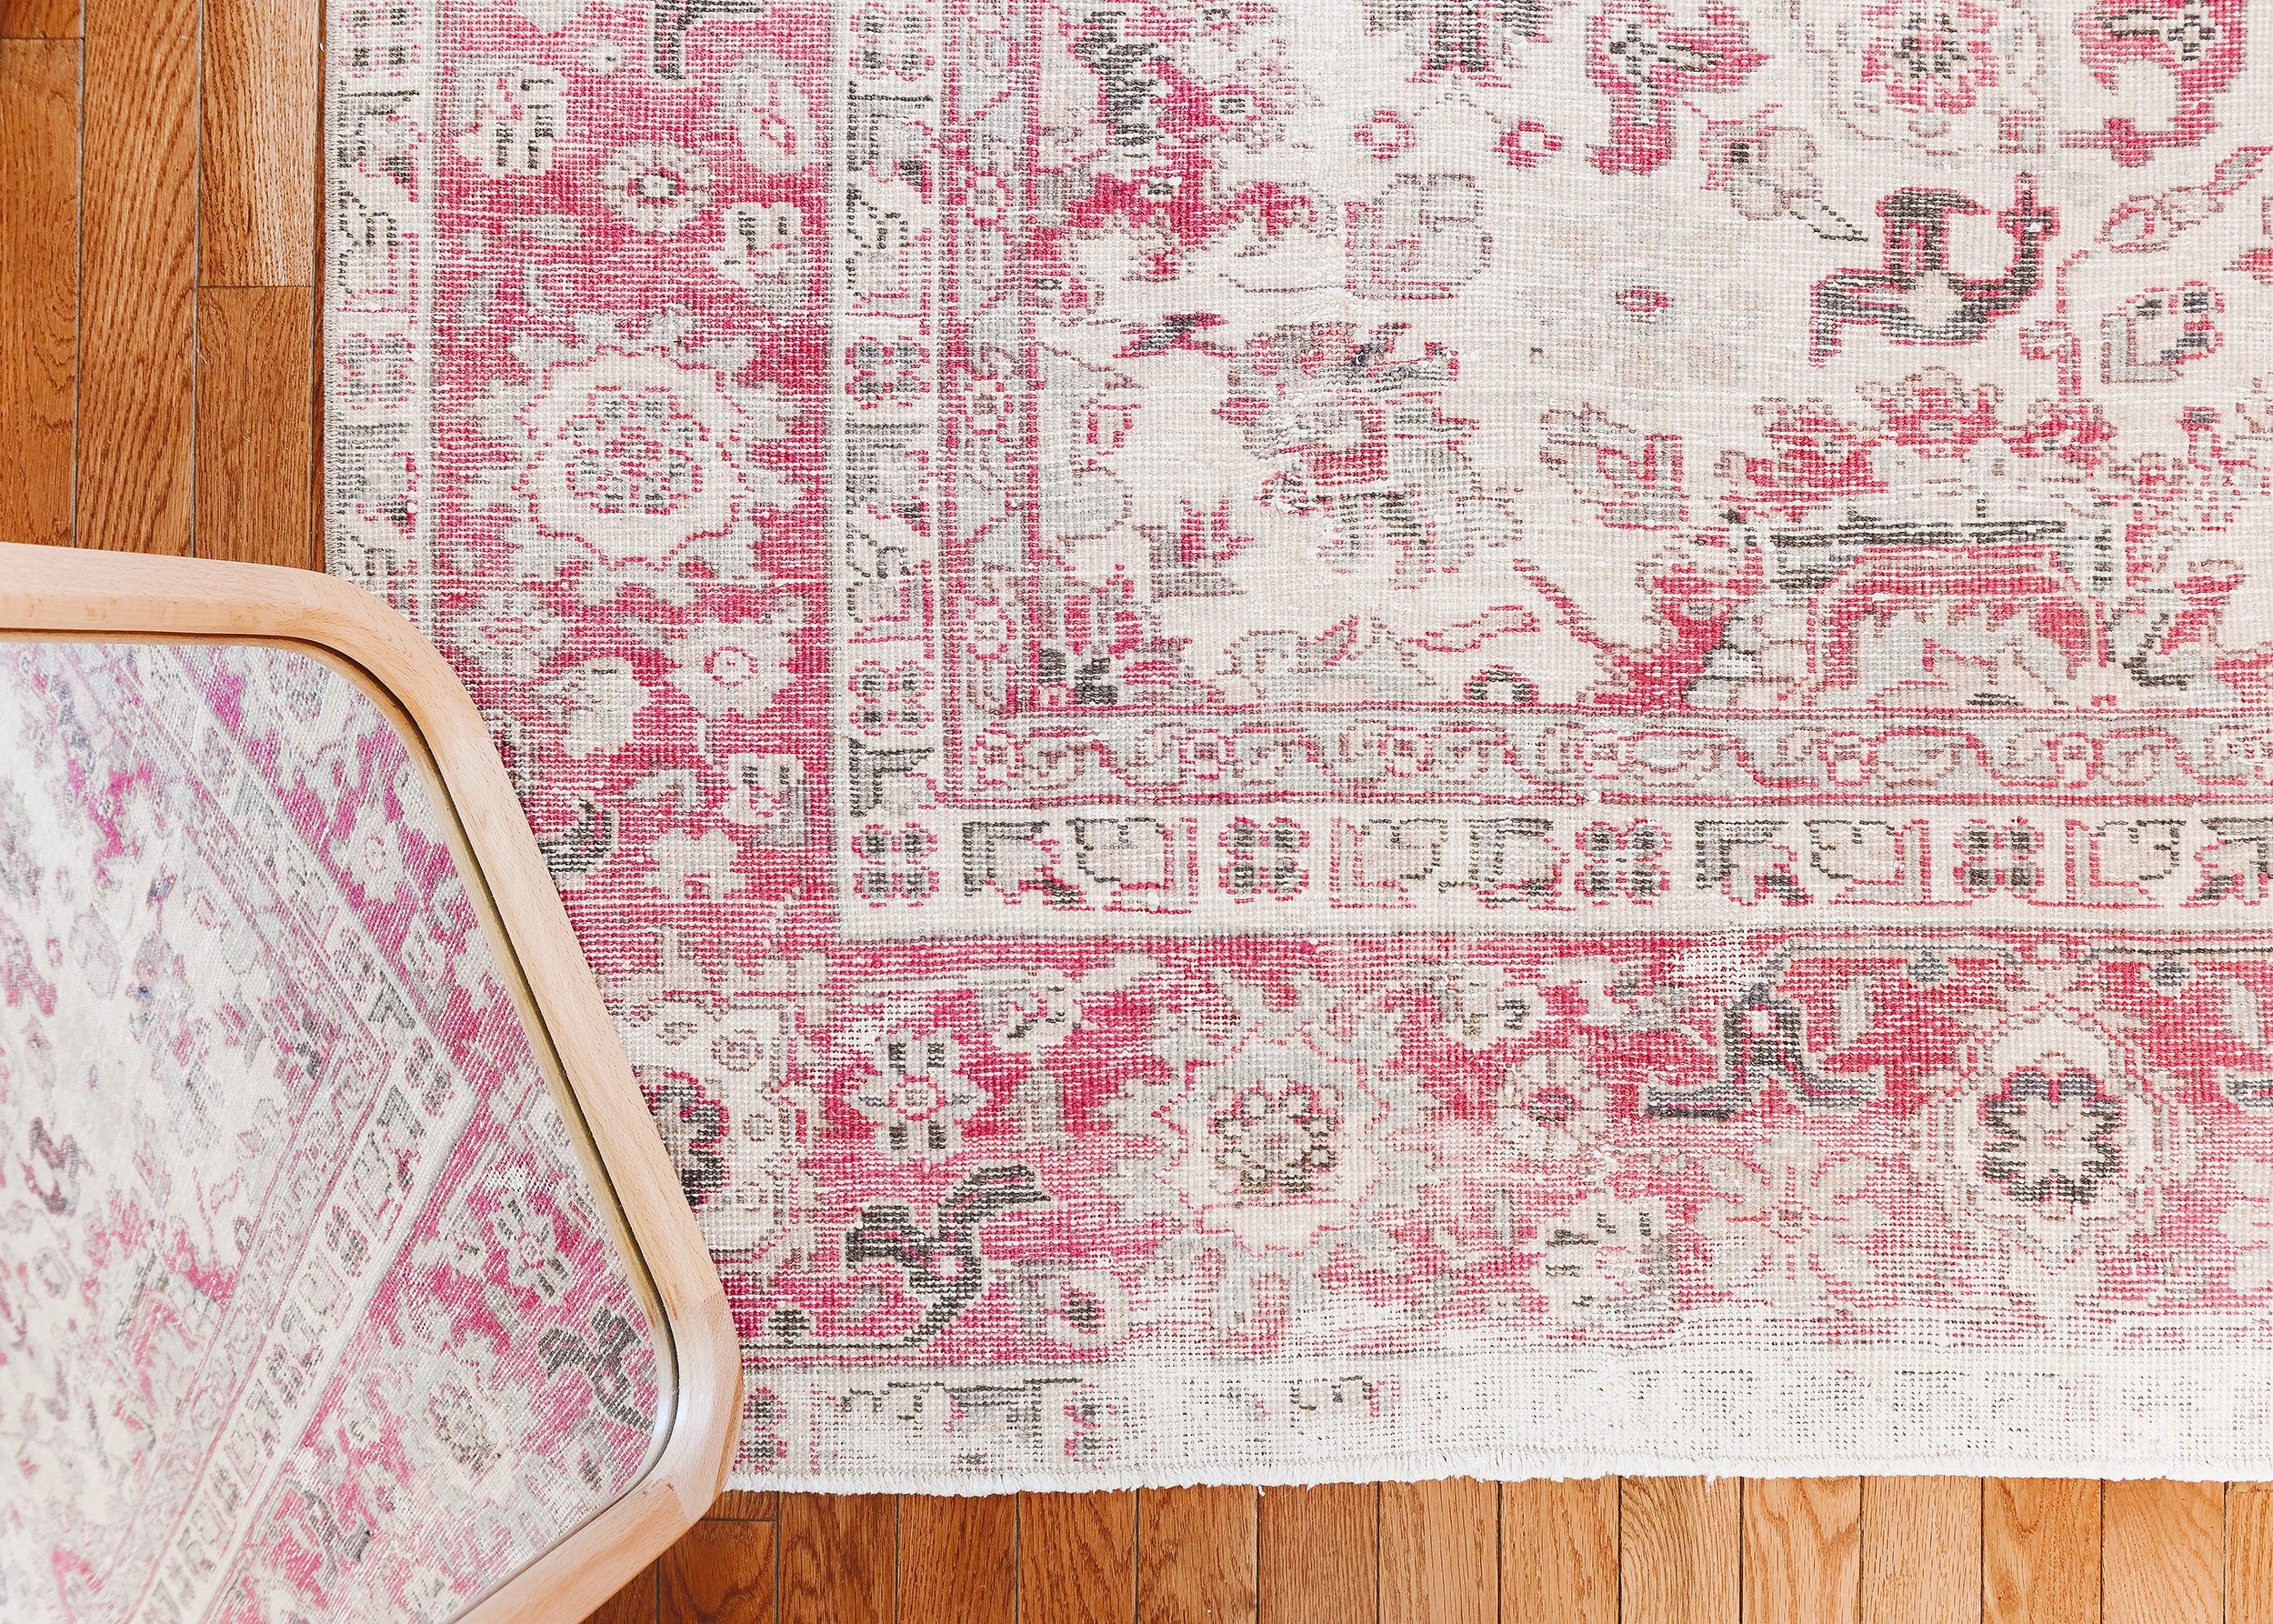 A detail of our Revival Rugs purchase | What to Look for When Buying a Vintage Rug, via Yellow Brick Home